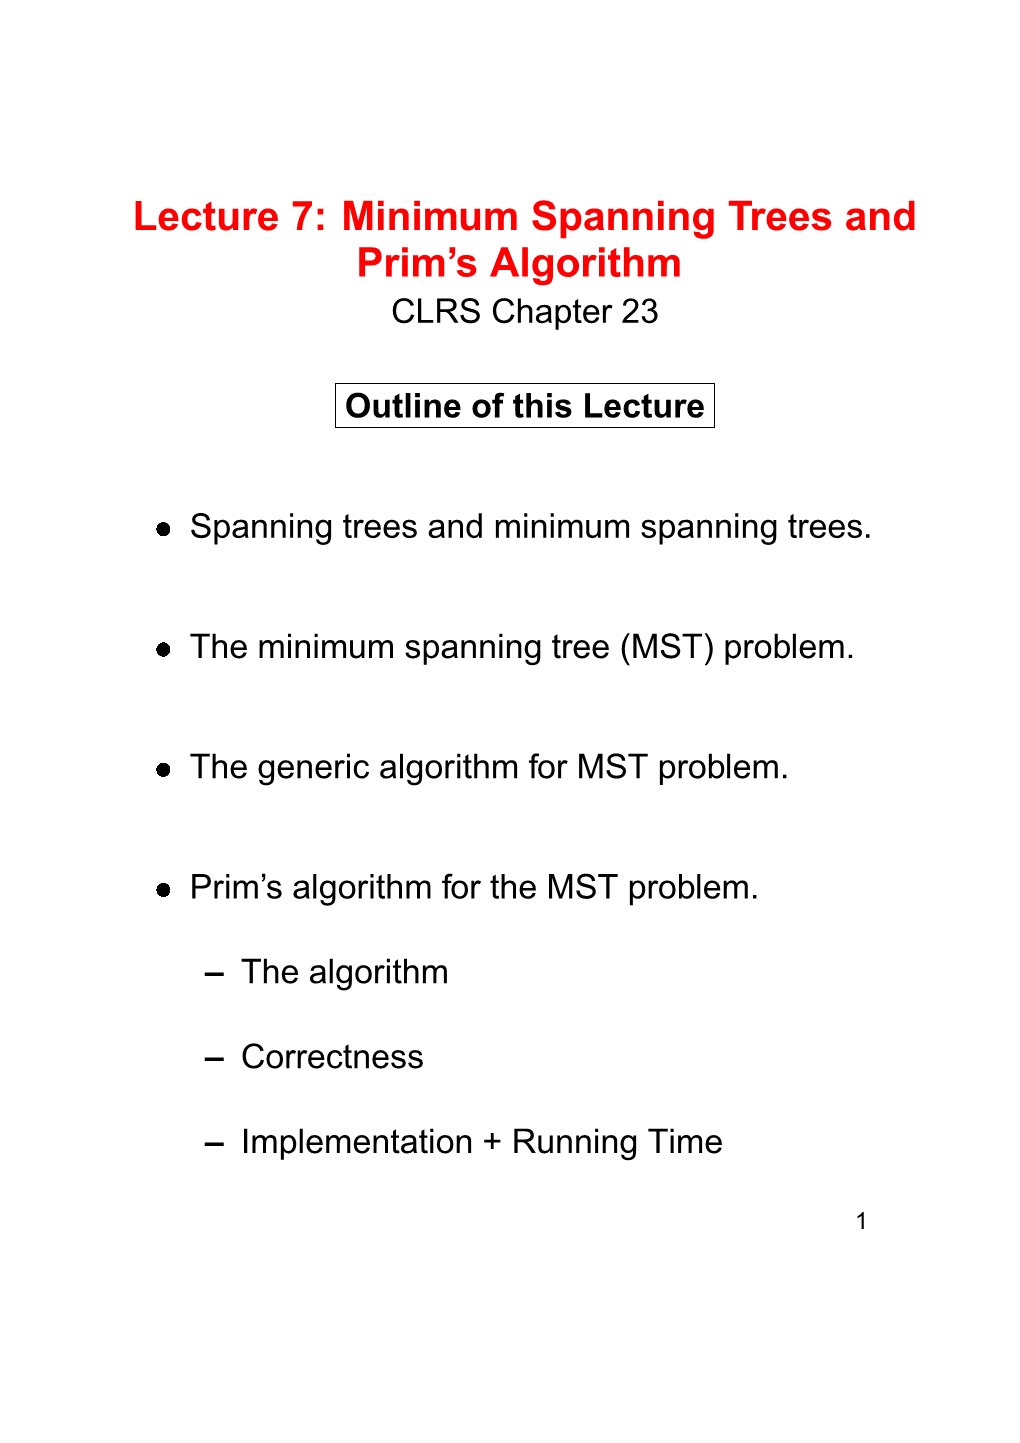 Lecture 7: Minimum Spanning Trees and Prim's Algorithm CLRS Chapter 23